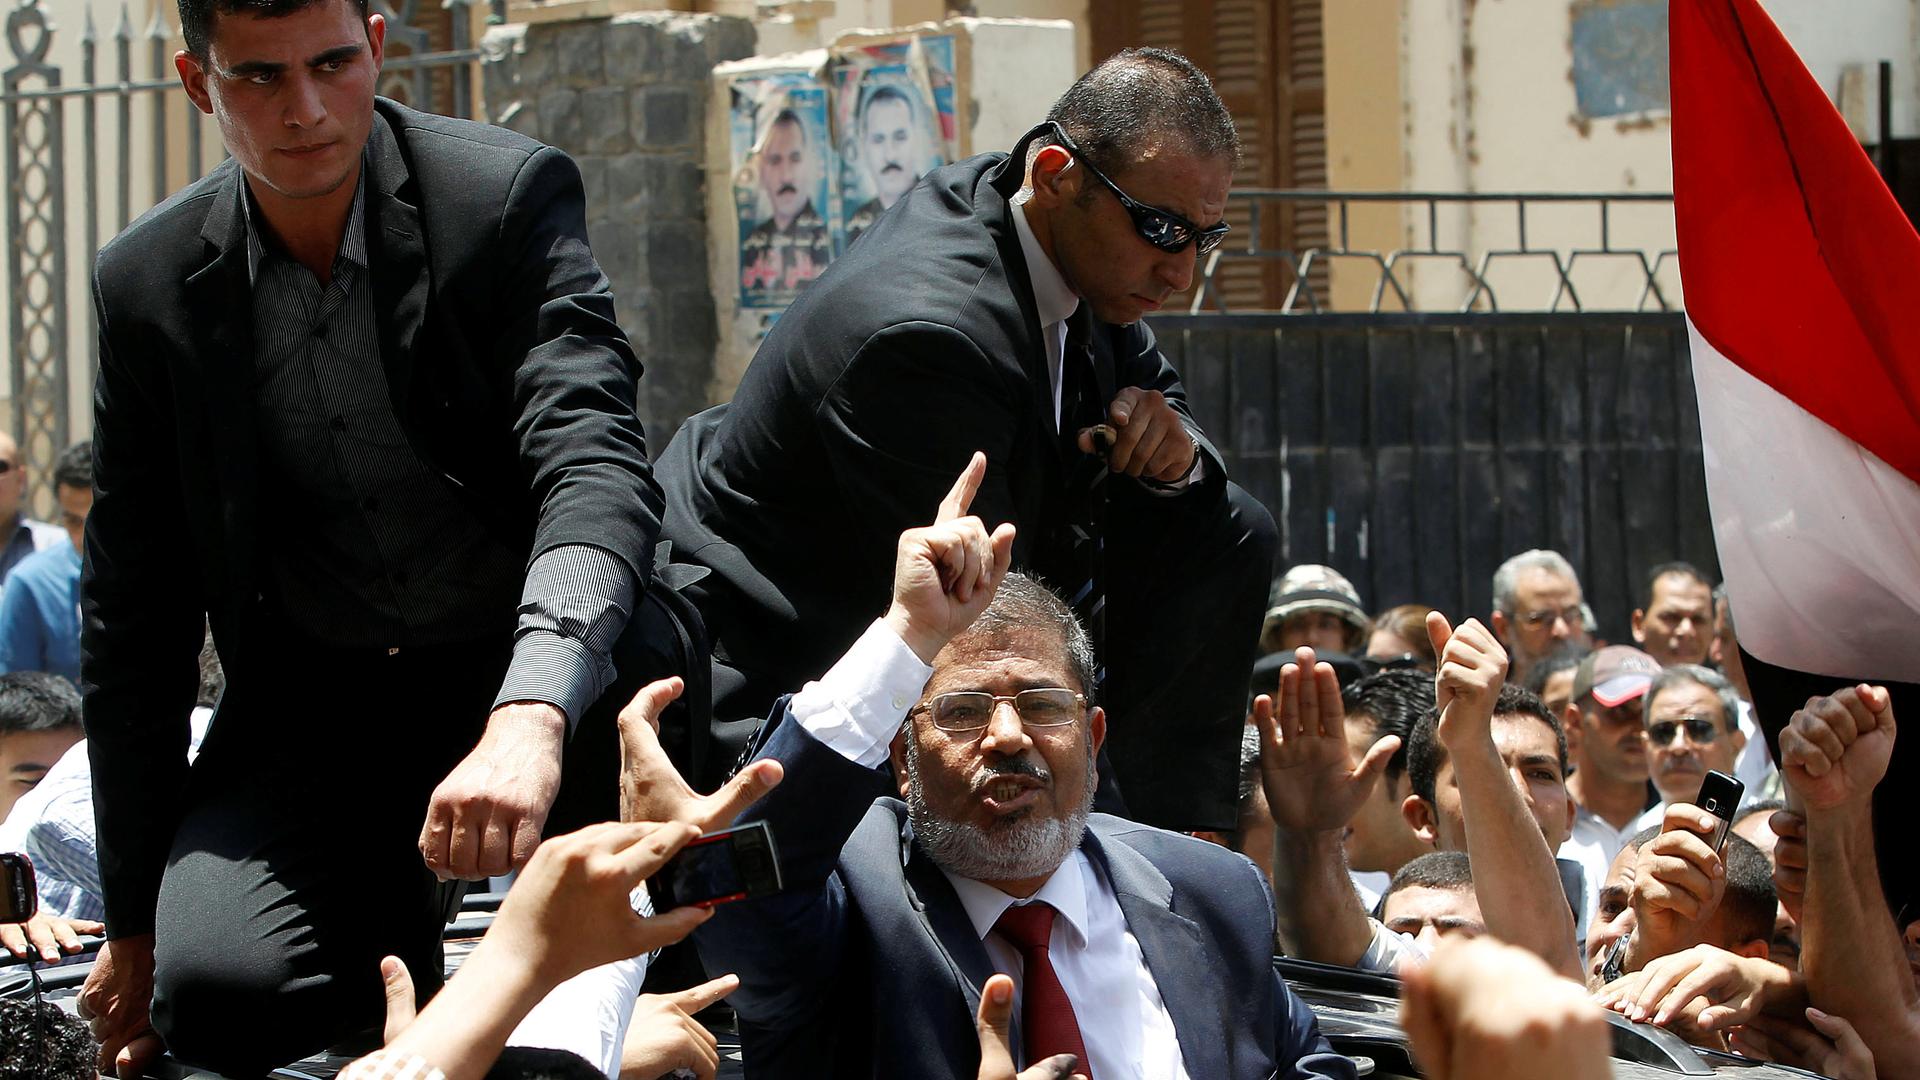 Mohammed Morsi, former president of Egypt, waved to his supporters after casting his vote at a polling station in a school in Al-Sharqya, 37 miles northeast of Cairo, on June 16, 2012.